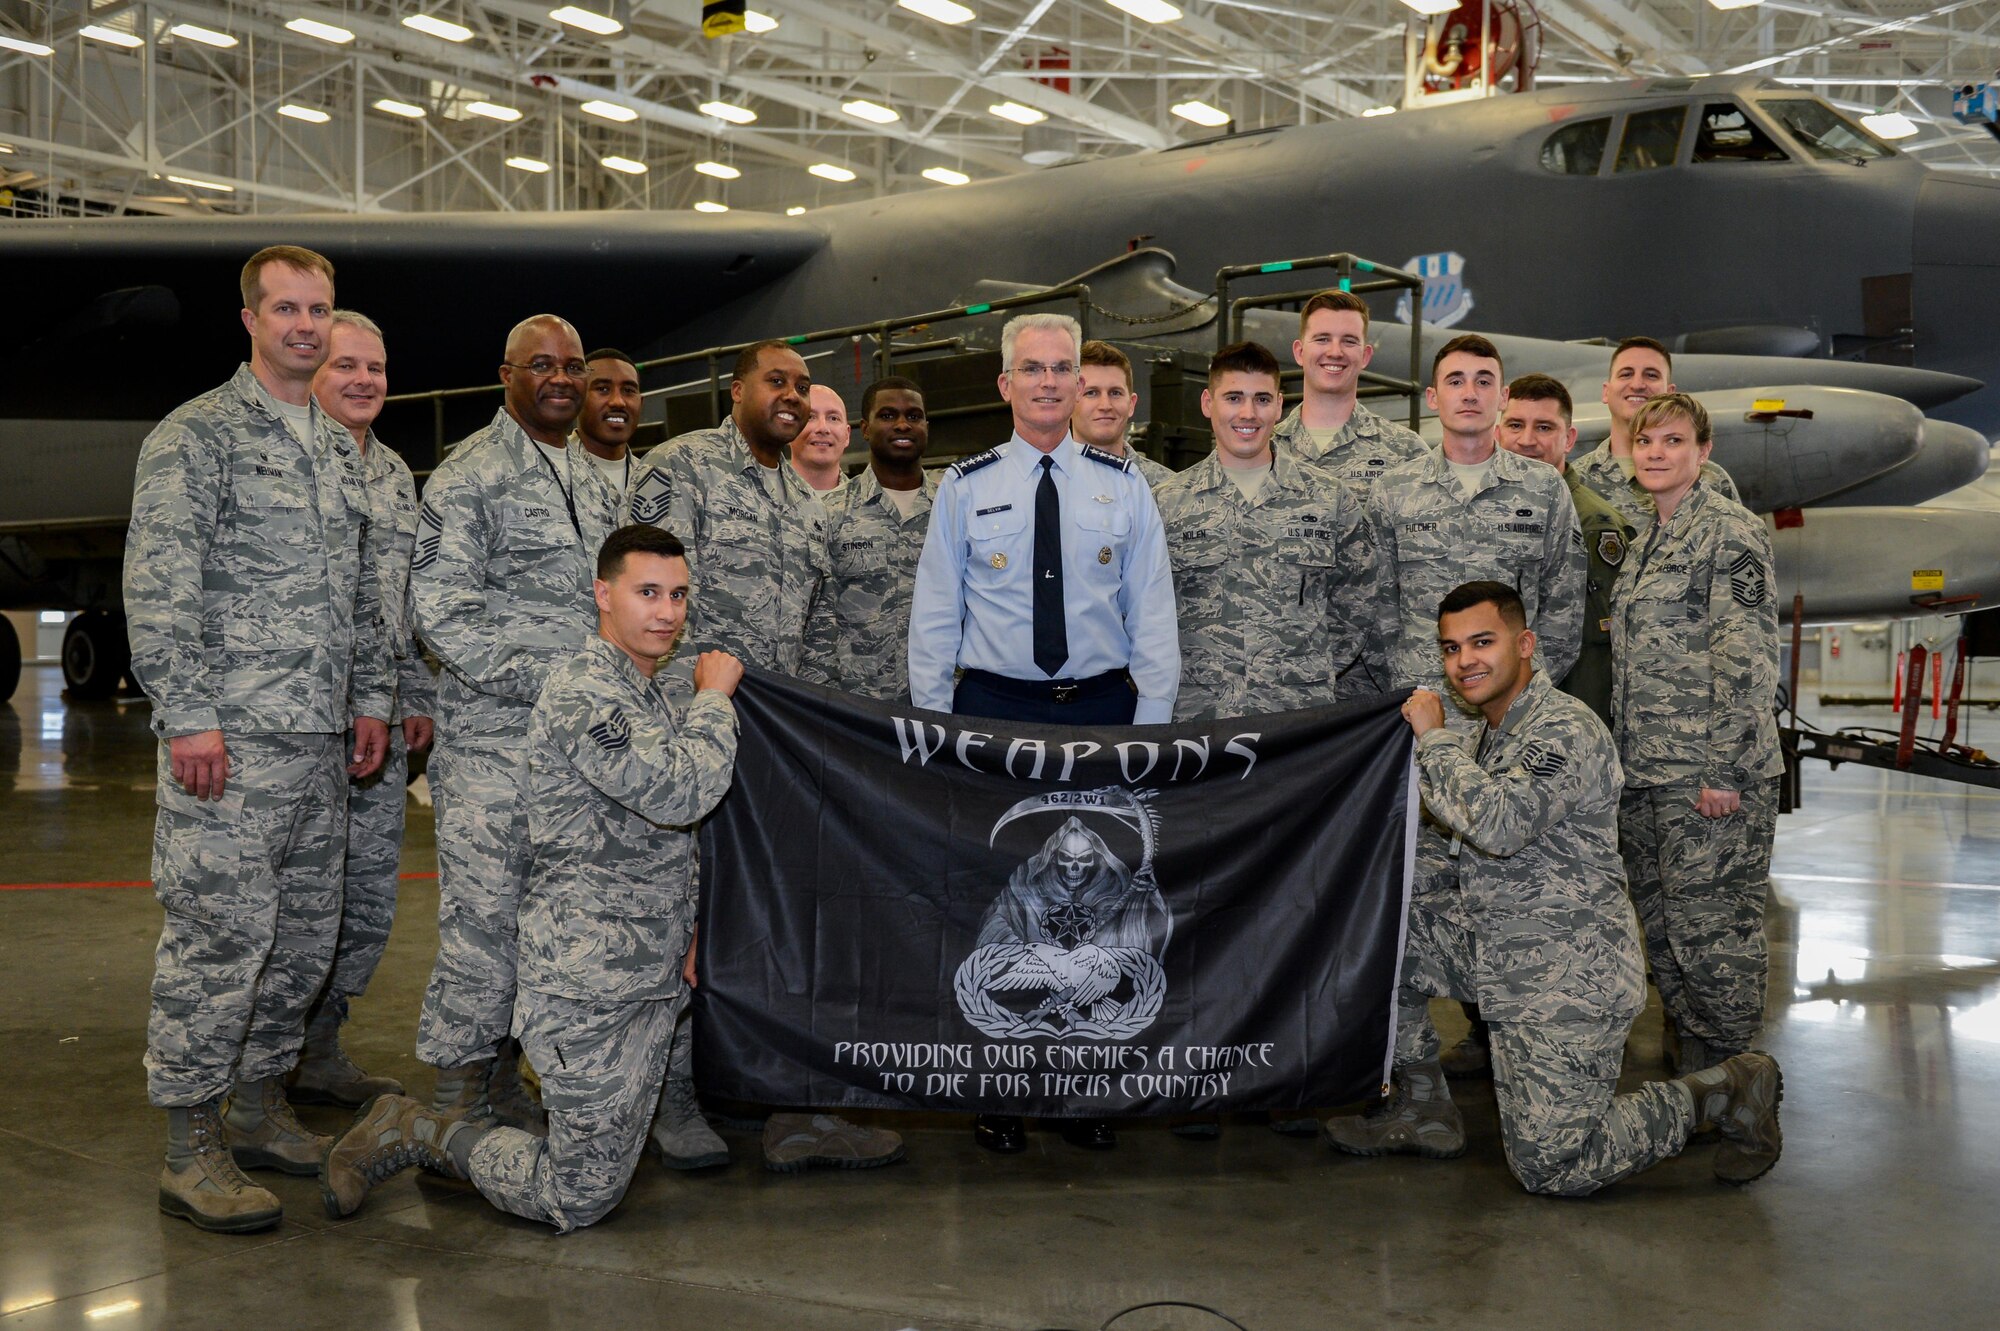 Gen. Paul J. Selva, vice chairman of the Joint Chiefs of Staff, poses for a photo with Airmen during a nuclear enterprise immersion tour at Barksdale Air Force Base, La., May 1, 2017. During the tour Selva met with senior leadership to discuss the importance of the nuclear enterprise and thank the Airmen at Barksdale for the role they play in the U.S. deterrence mission. (U.S. Air Force photo/Senior Airman Mozer O. Da Cunha)